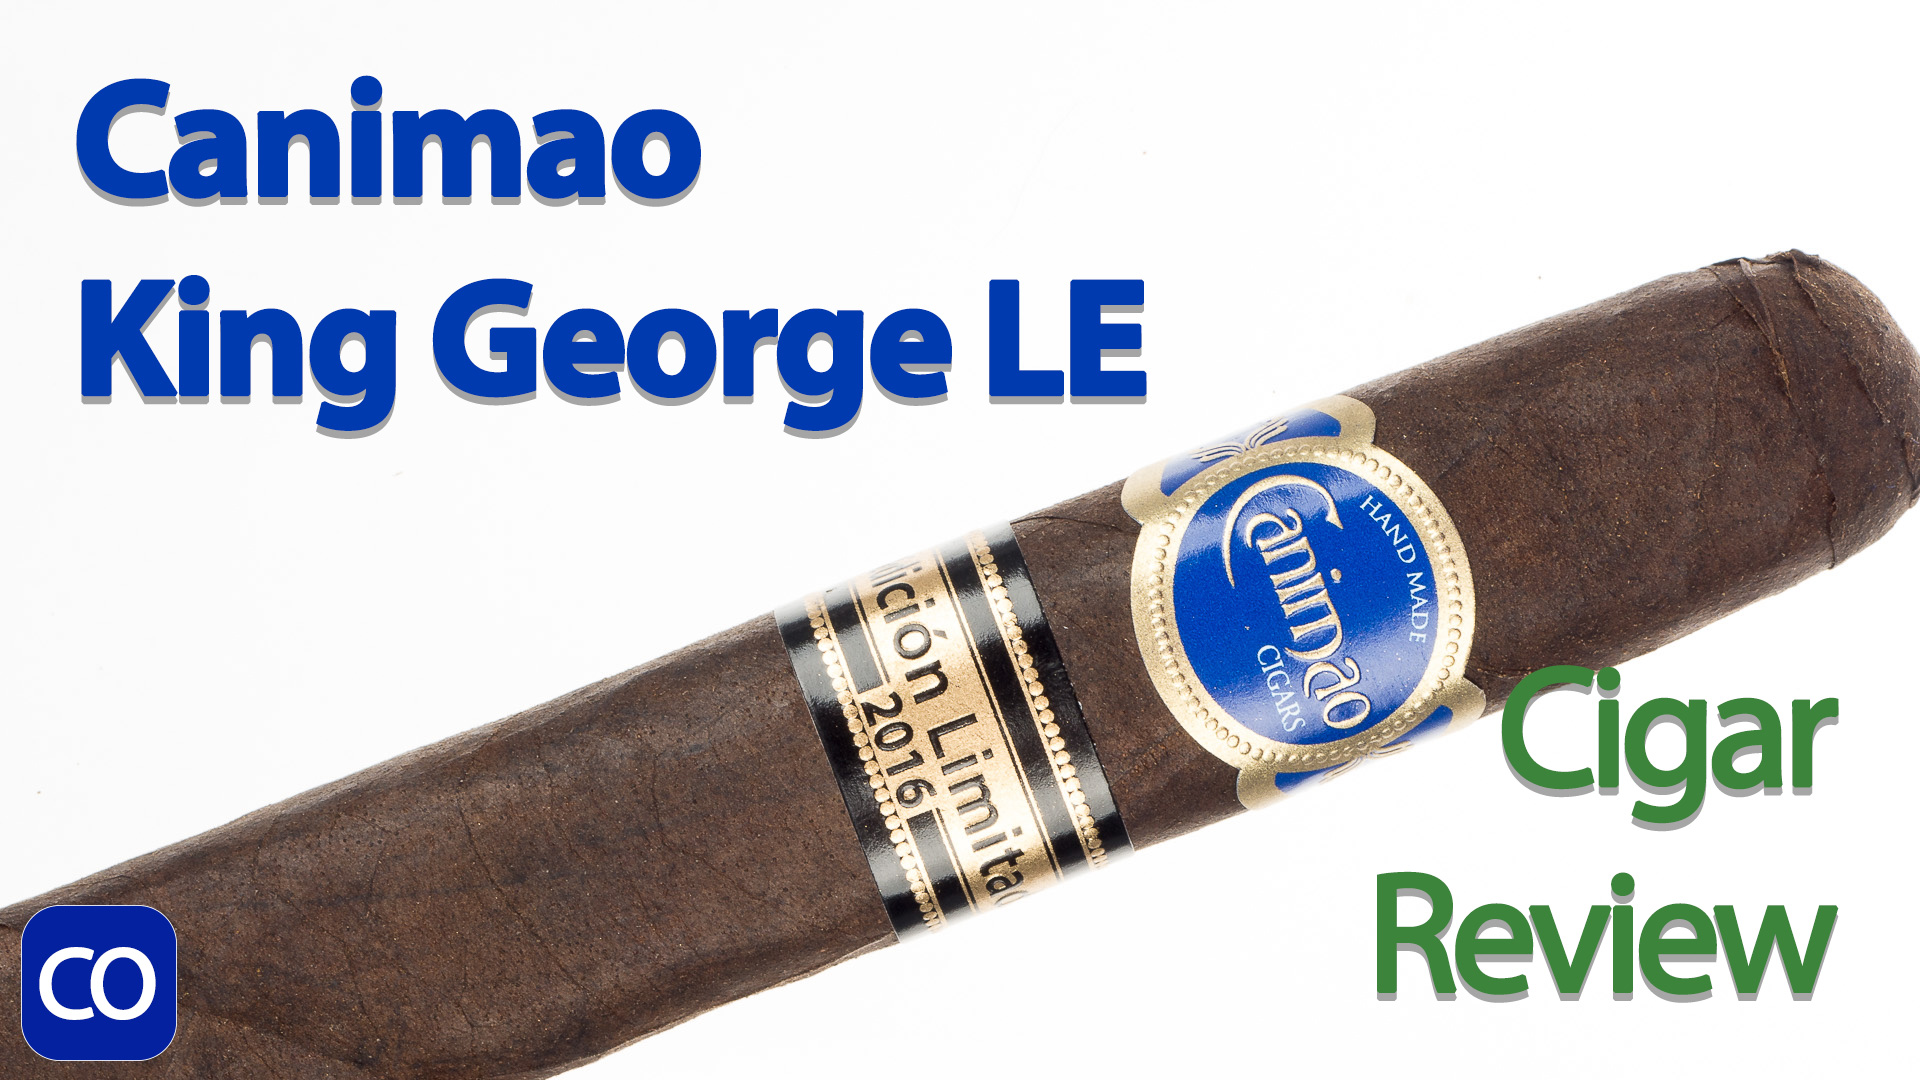 Canimao King George Limited Edition Cigar Review